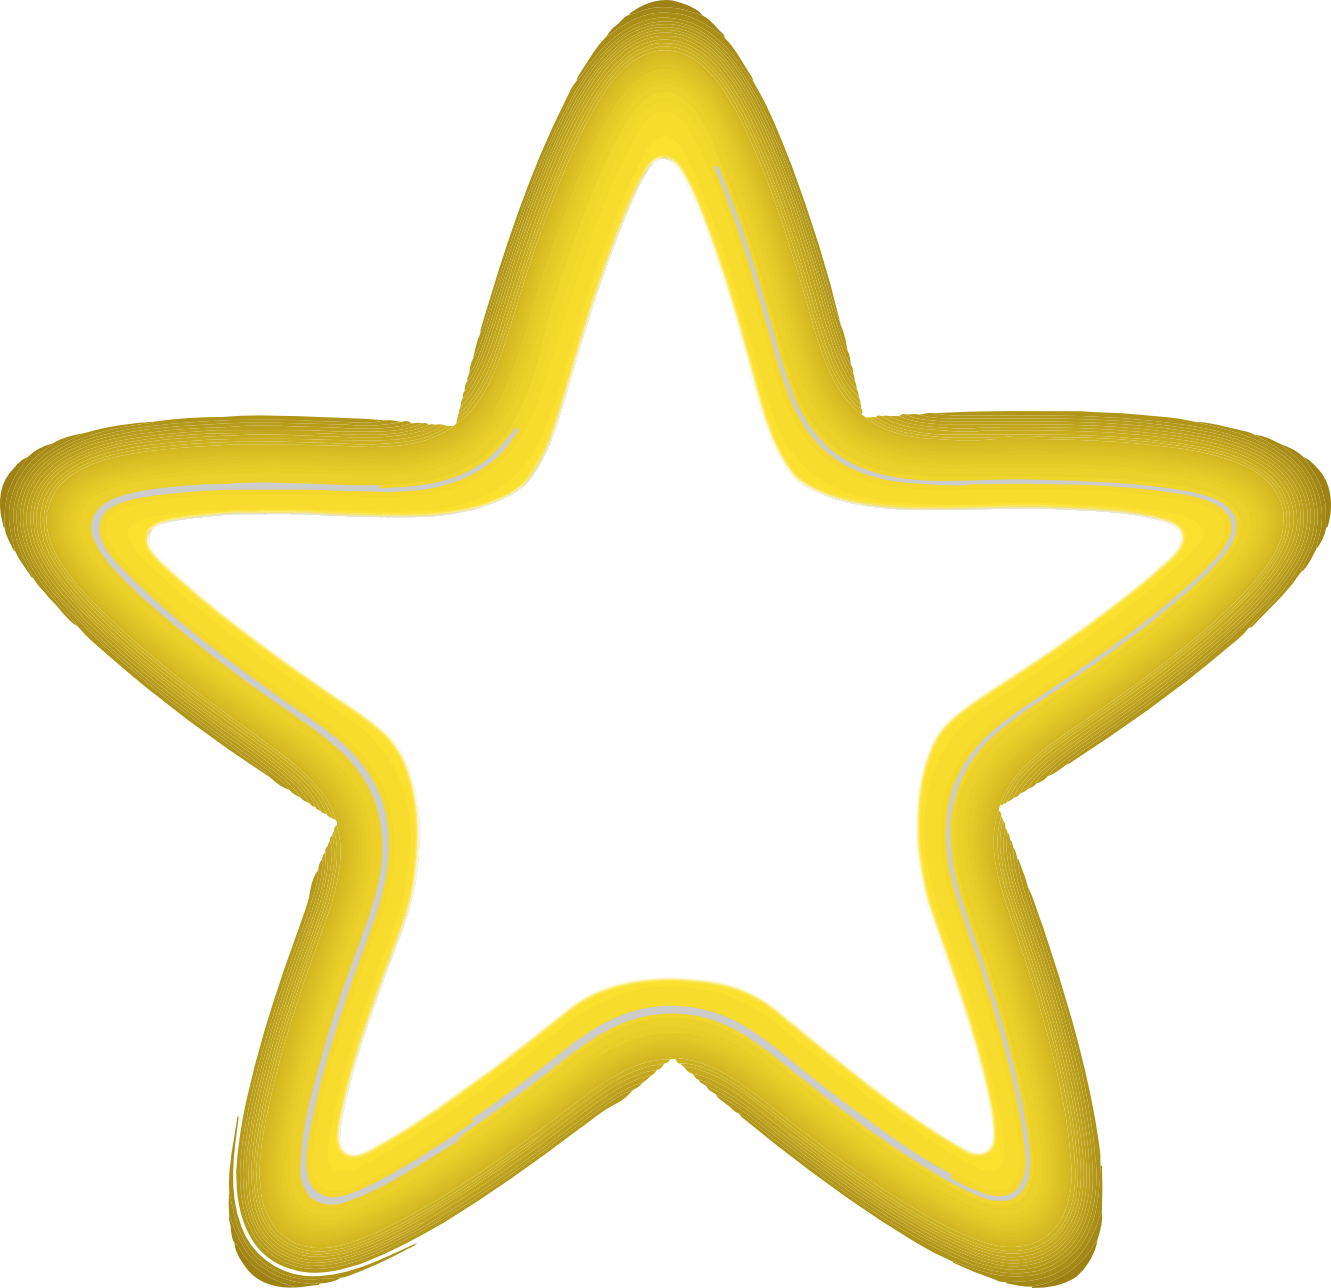 Yellow Star Clip Art Images - ClipArt Best